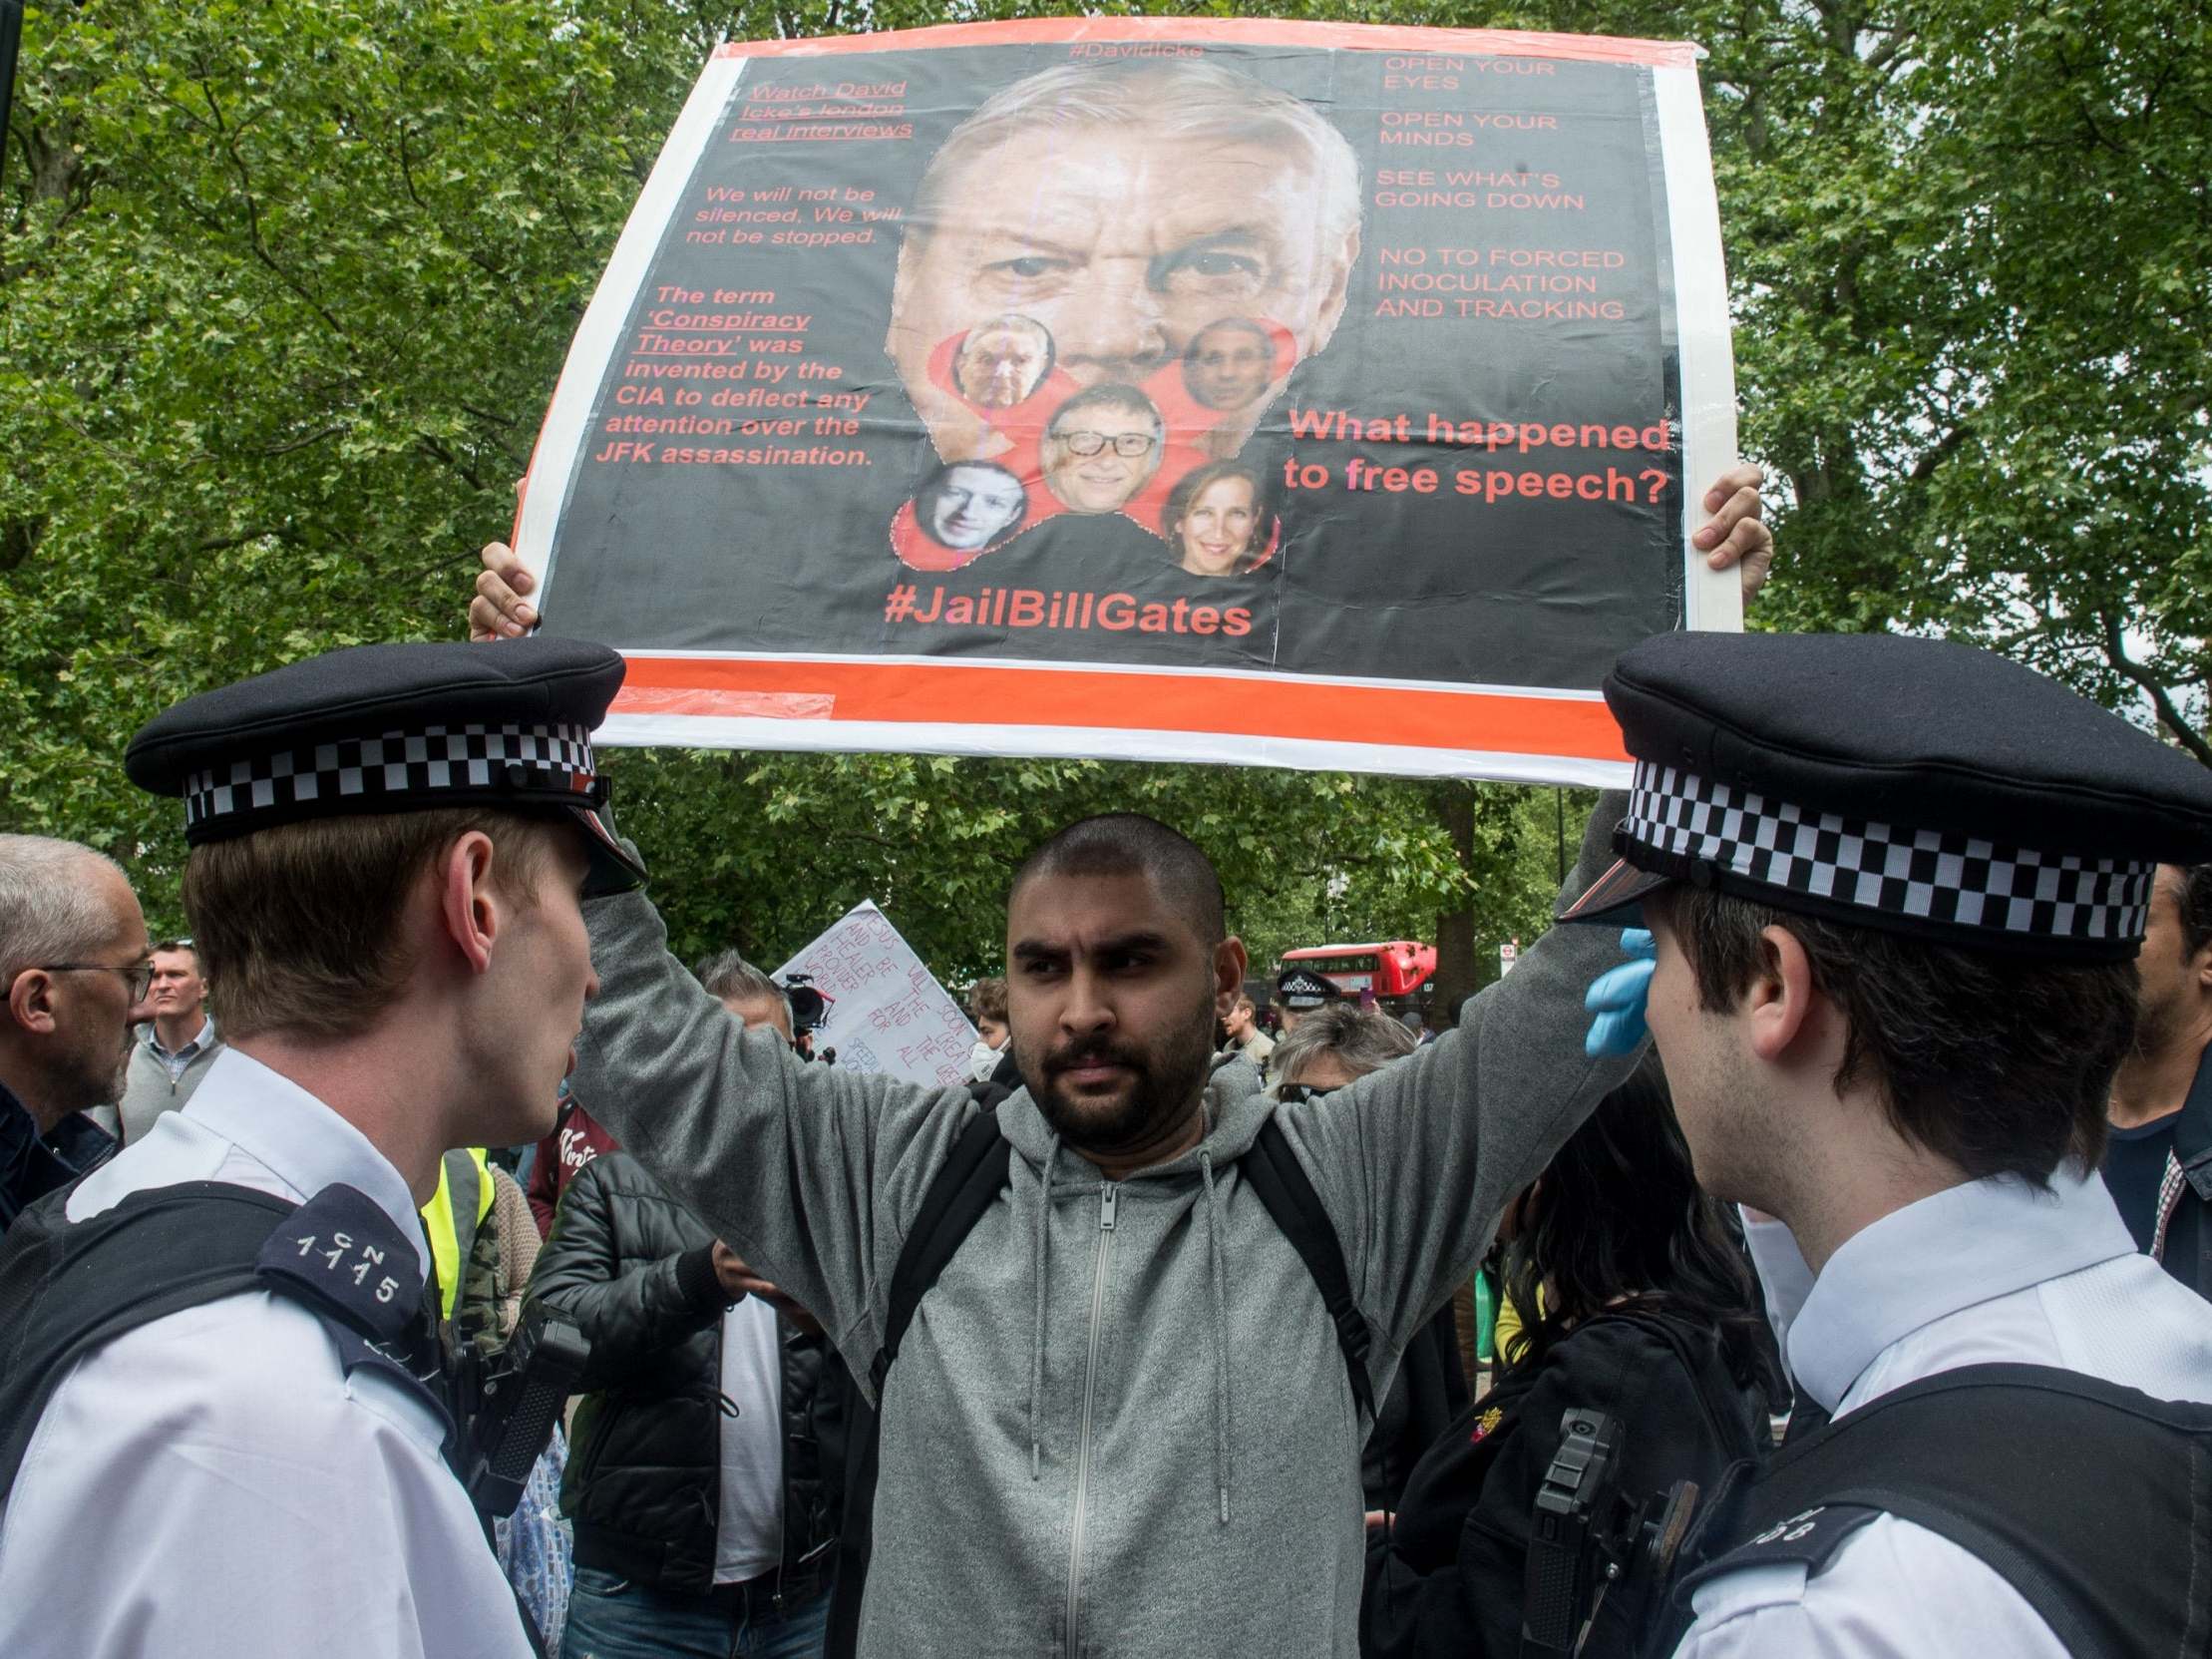 Police speak to a protestor as conspiracy theorists gather at Hyde Park Corner on 16 May 2020 in London